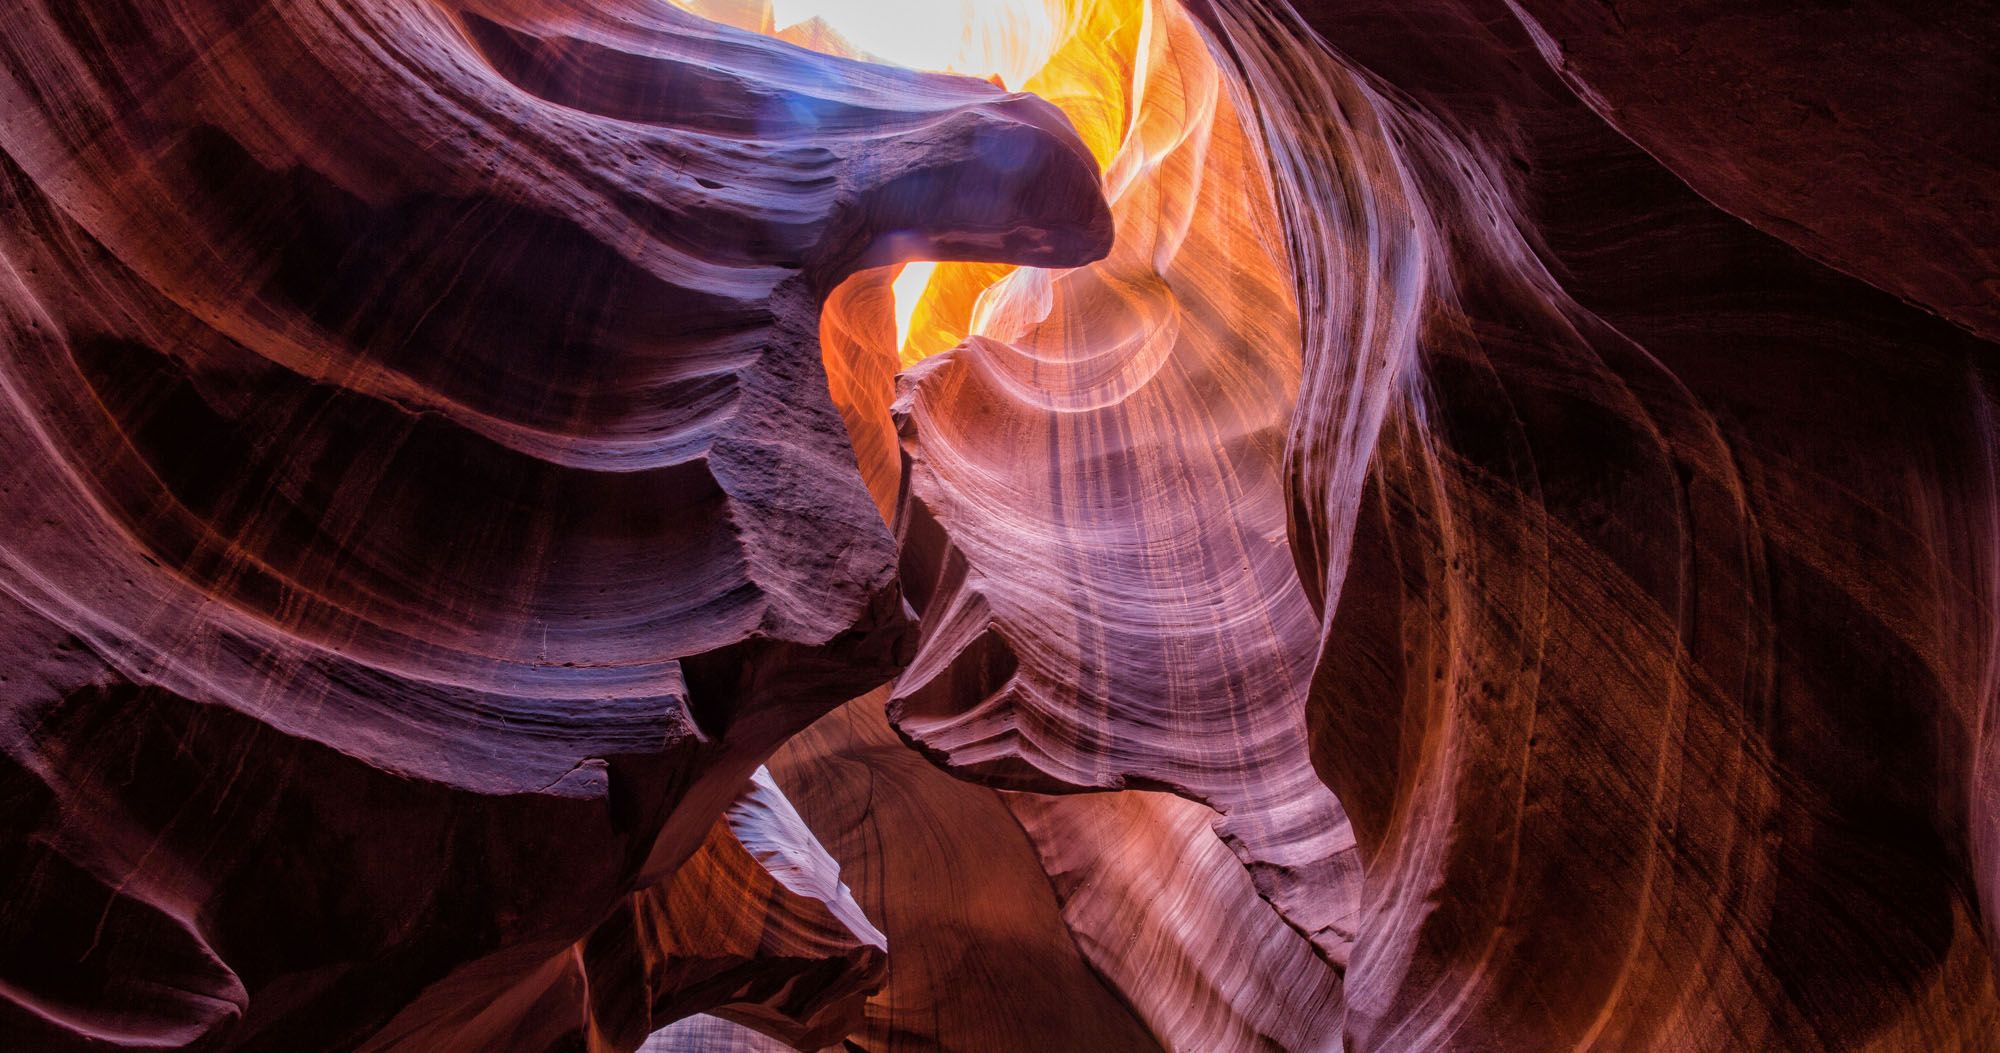 Featured image for “10 Amazing Slot Canyons to Explore in the American Southwest”